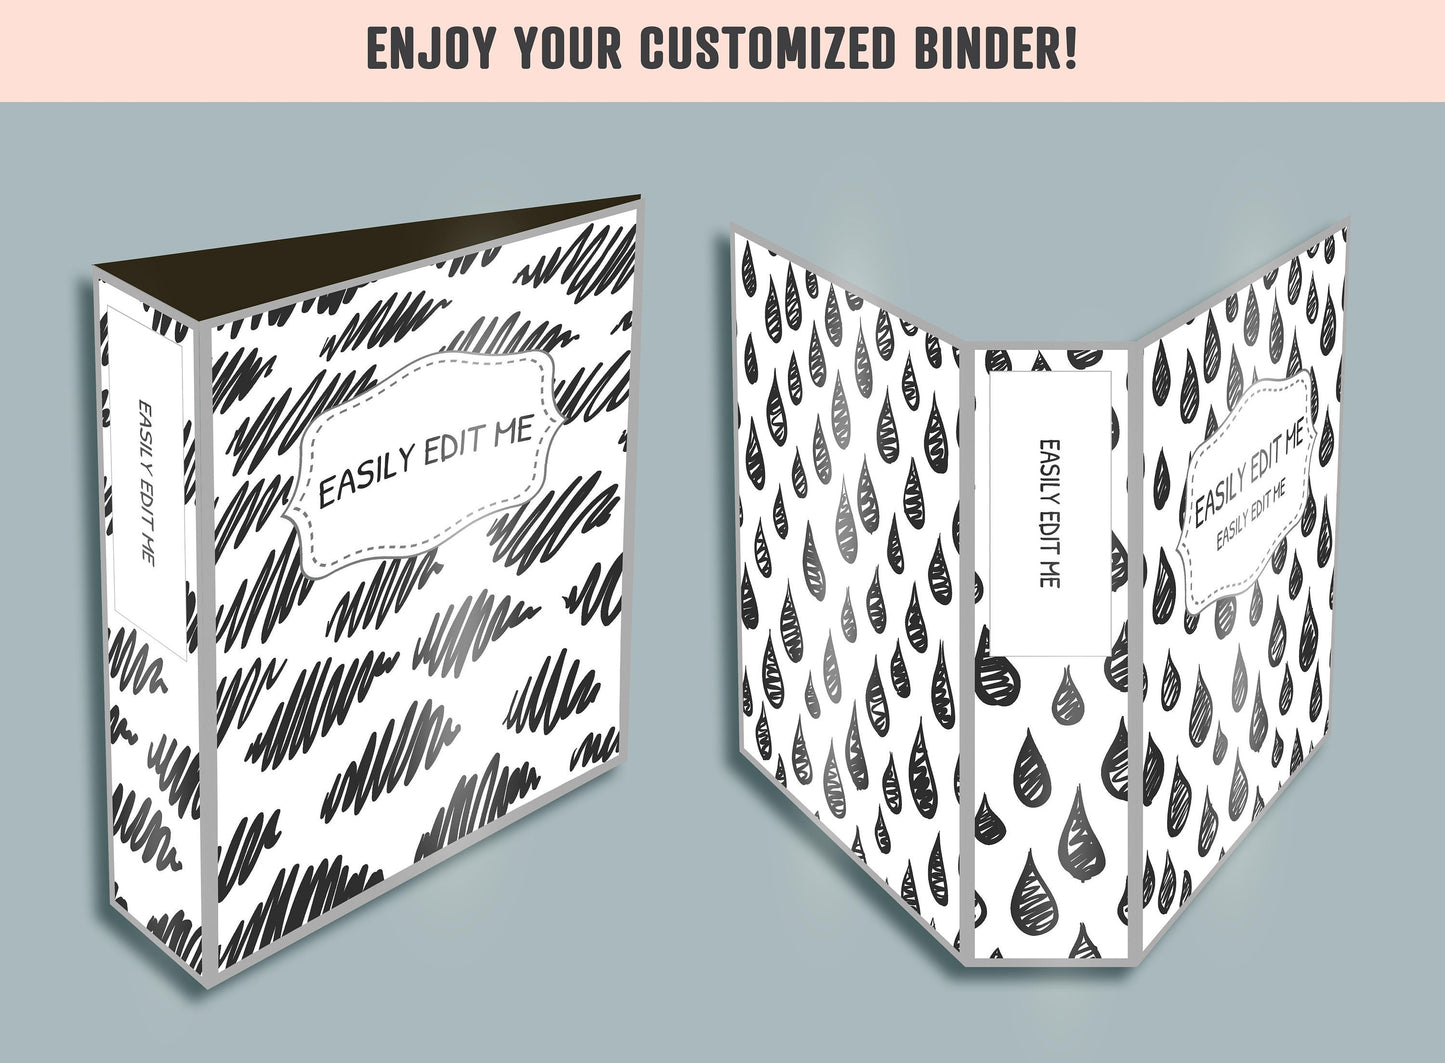 Texture, Curved Lines Binder Cover, 10 Printable & Editable Black/White Binder Covers + Spines, Binder Inserts, Teacher/School Planner Cover